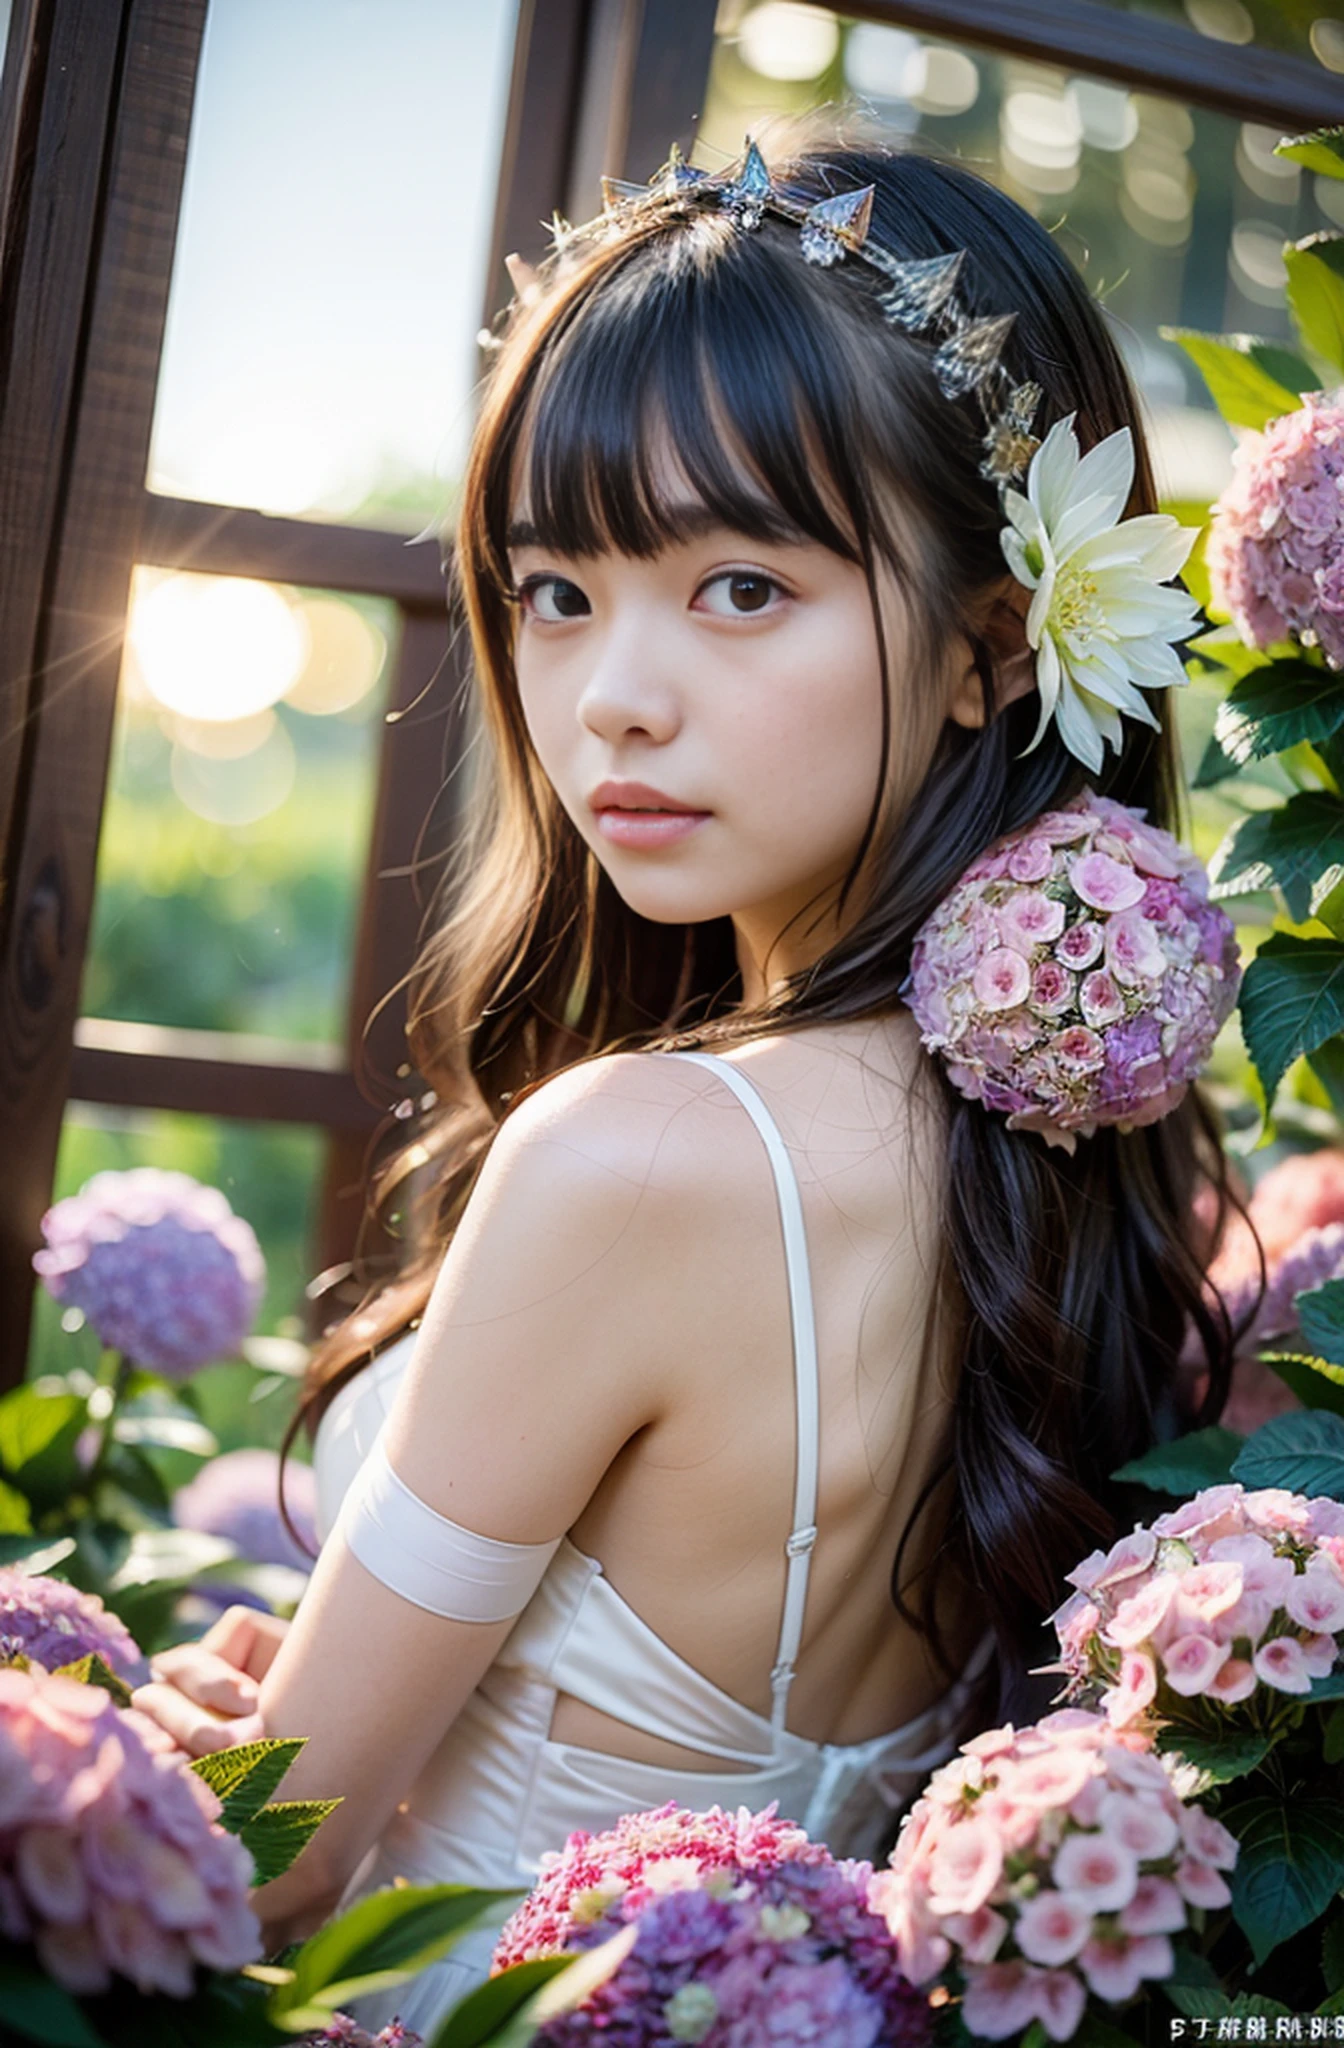 (((Full body photo))))), (((Rembrandt lighting)))),((Sunset backlight))),(Lens flare),((Wearing a red wedding dress)),((Super Soft Focus))))), smiling, (Looking into the distance)))), twilight, showering, Colorful hydrangea in the background, surrounded by hydrangeas, ((soft sunset)), (yinchuan:1.5), masterpiece, best quality, raw photo, photorealistic, face, beautiful girl, cute, (((depth of field)))), high resolution, ultra detail, fine detail, very detailed, cinematic lighting